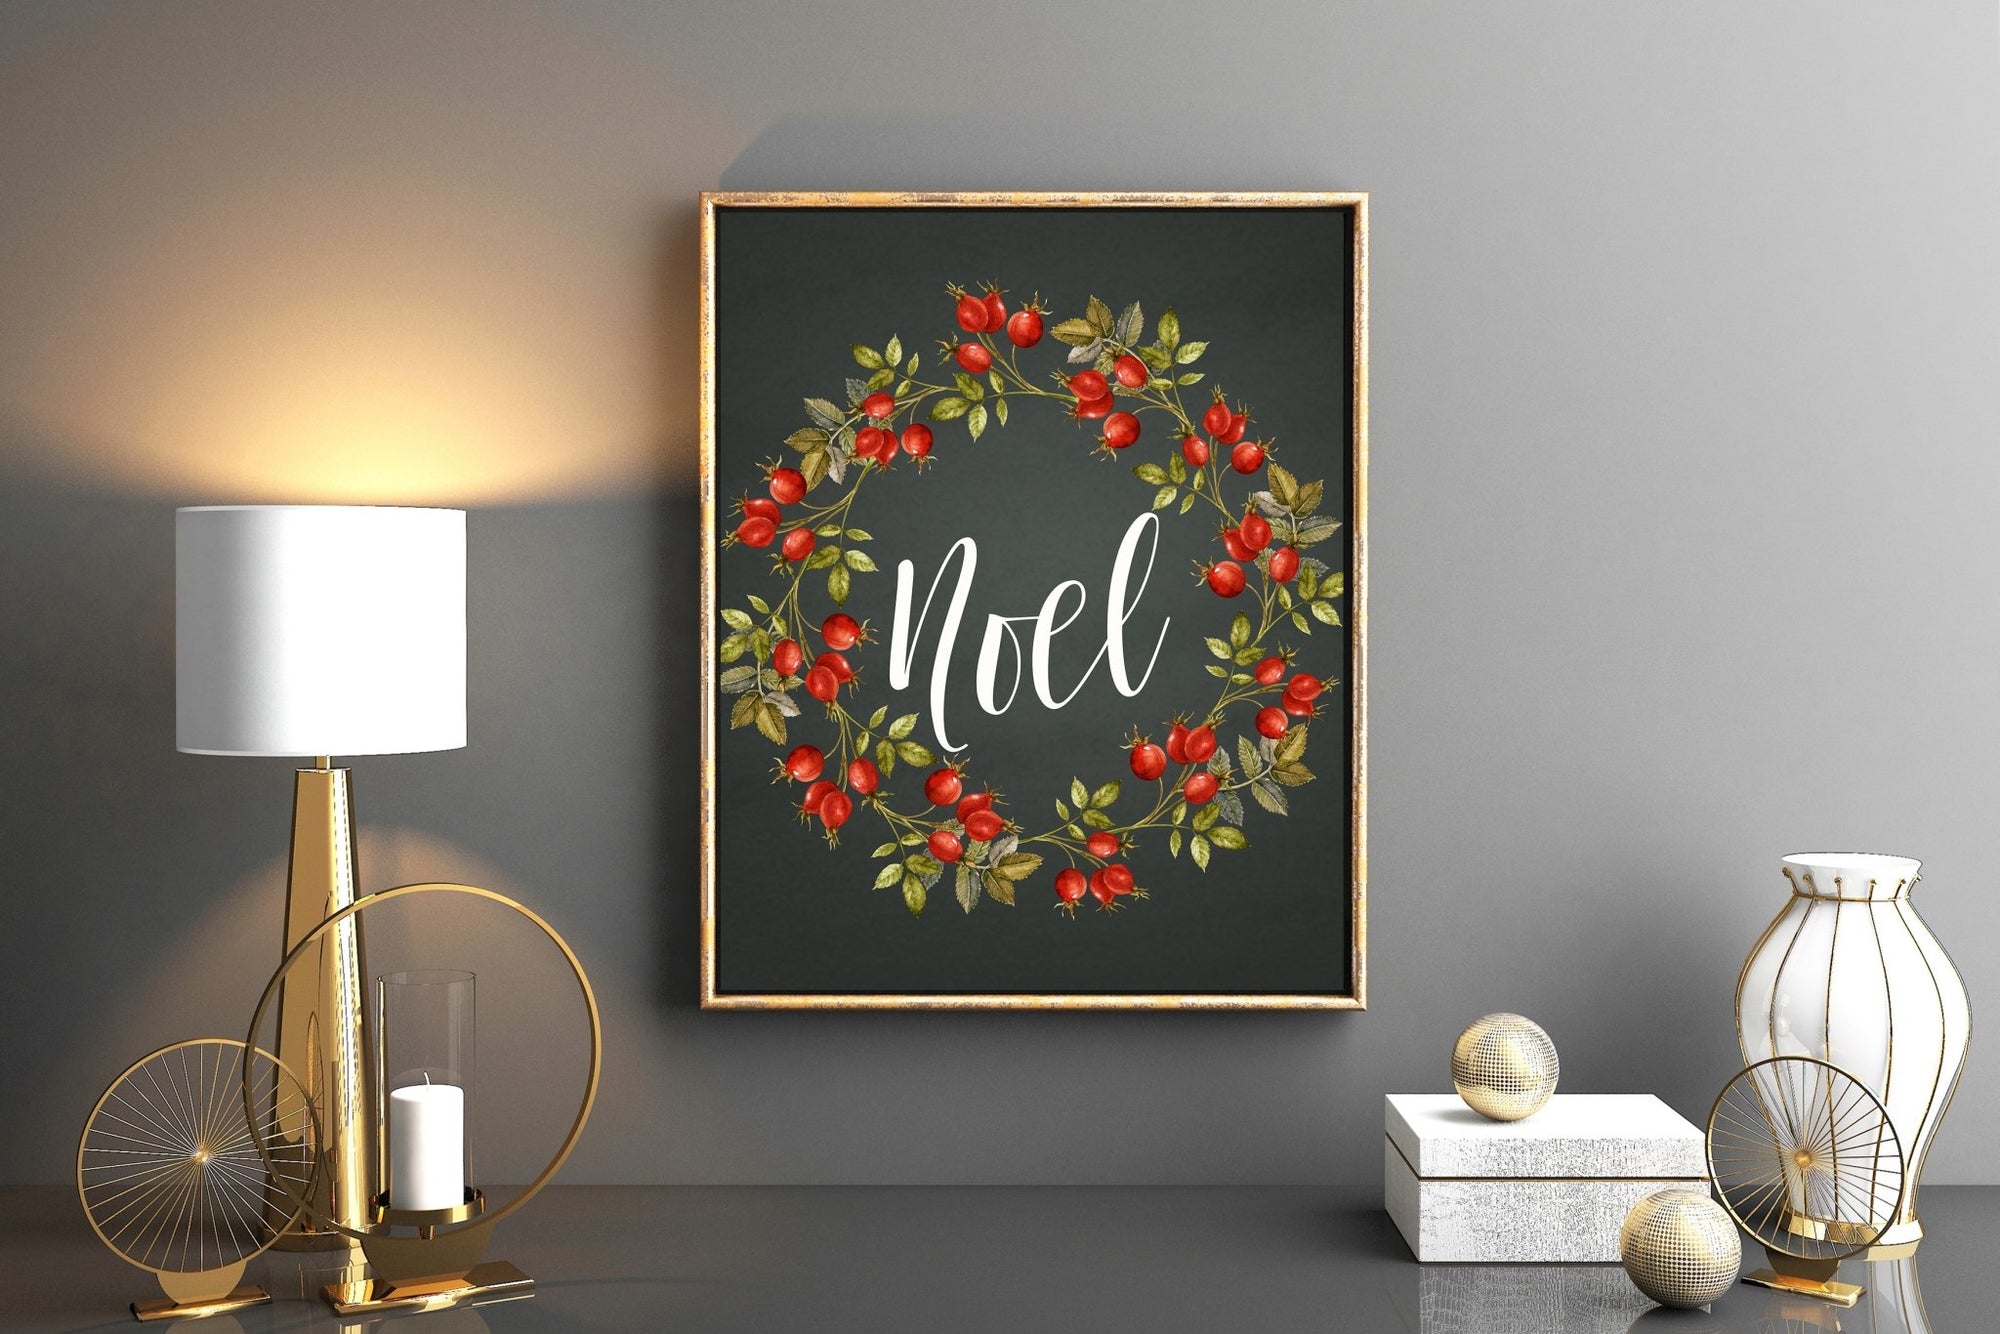 Noel Wall Art - FREE Printable - Pretty Collected